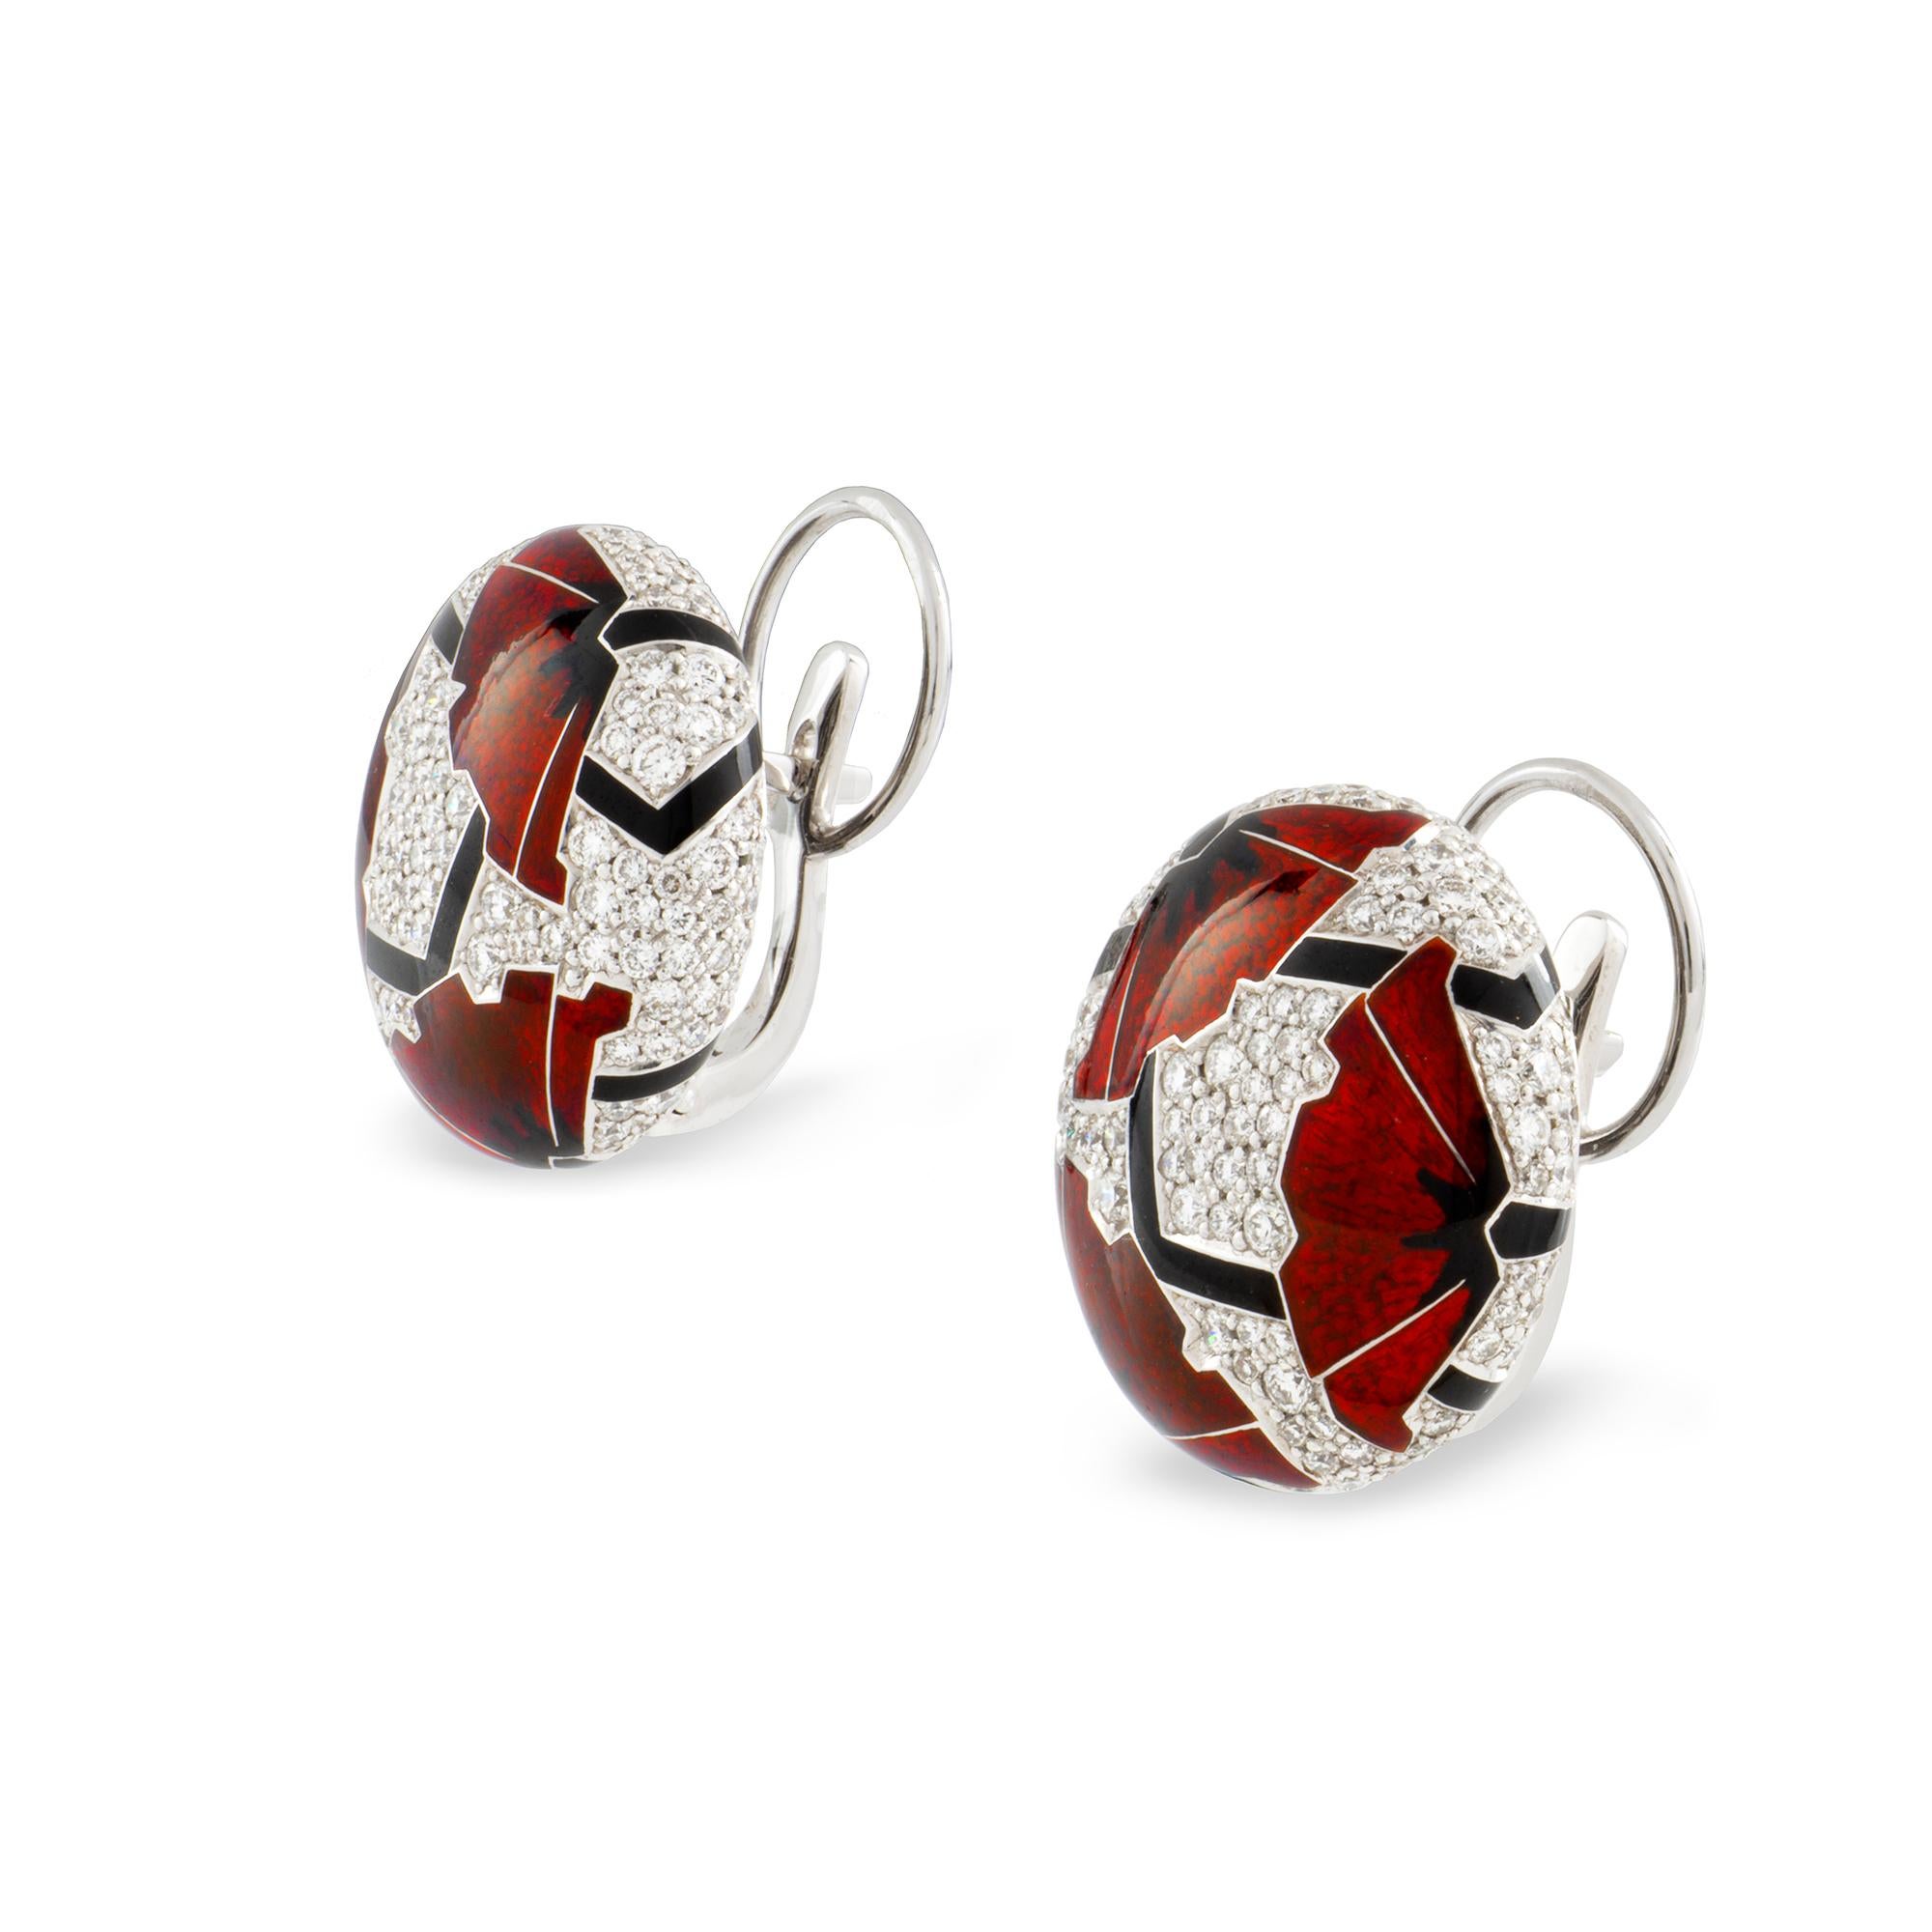 A pair of red poppies art-deco style earrings by Ilgiz F, each earring with three poppies with champlevé enamelled petals and hot enamelled peduncles, on a diamond pave-set background of round shape, the diamonds weighing 2.28 carats in total, all